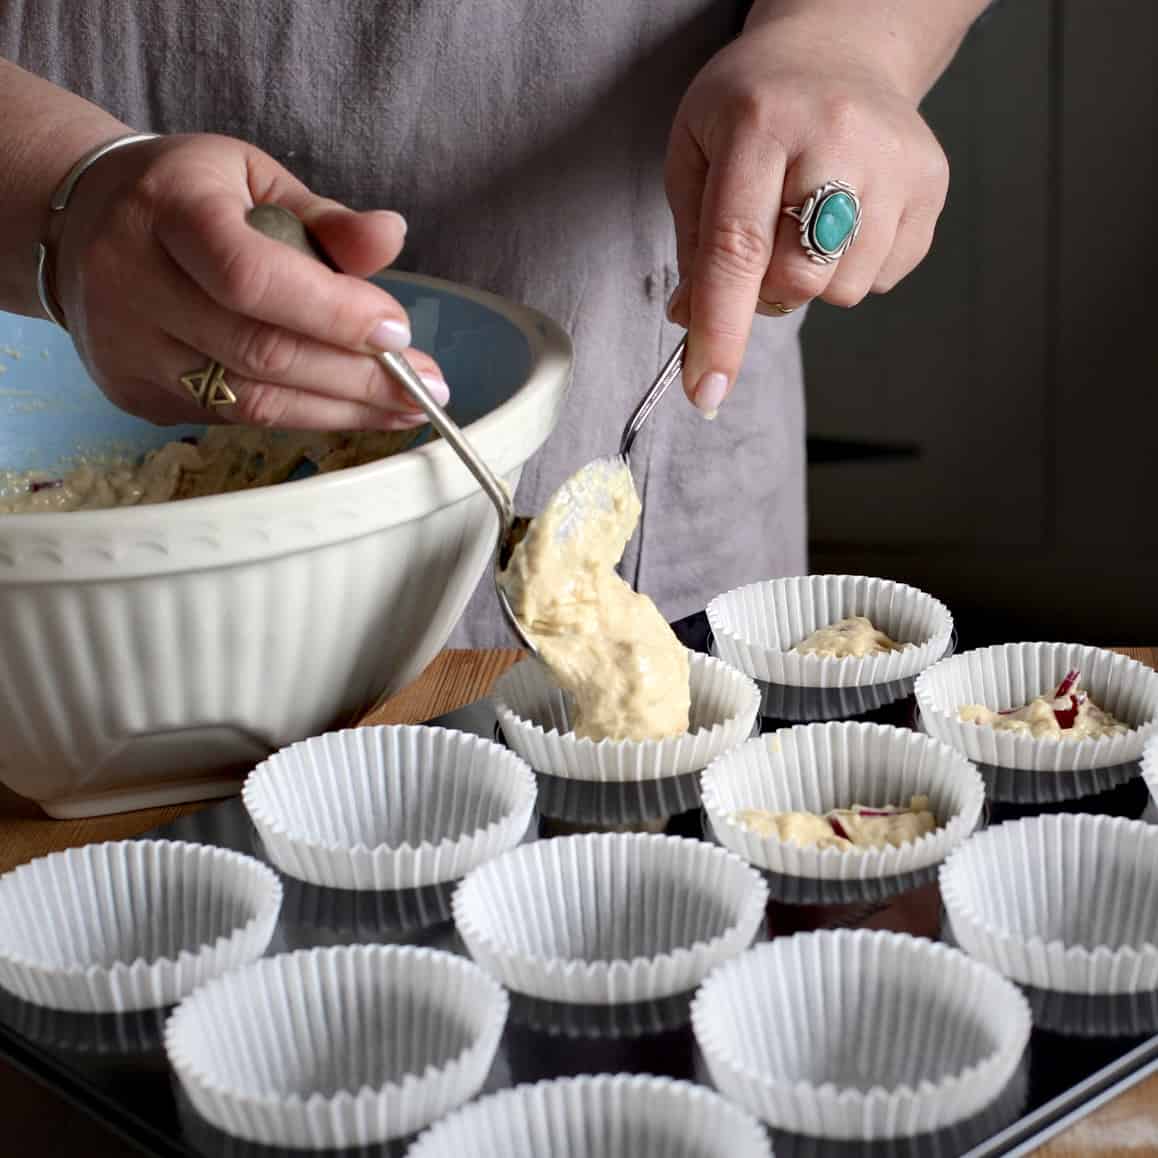 Woman’s spooning savoury muffin batter from a large white mixing bowl into white paper muffin cases